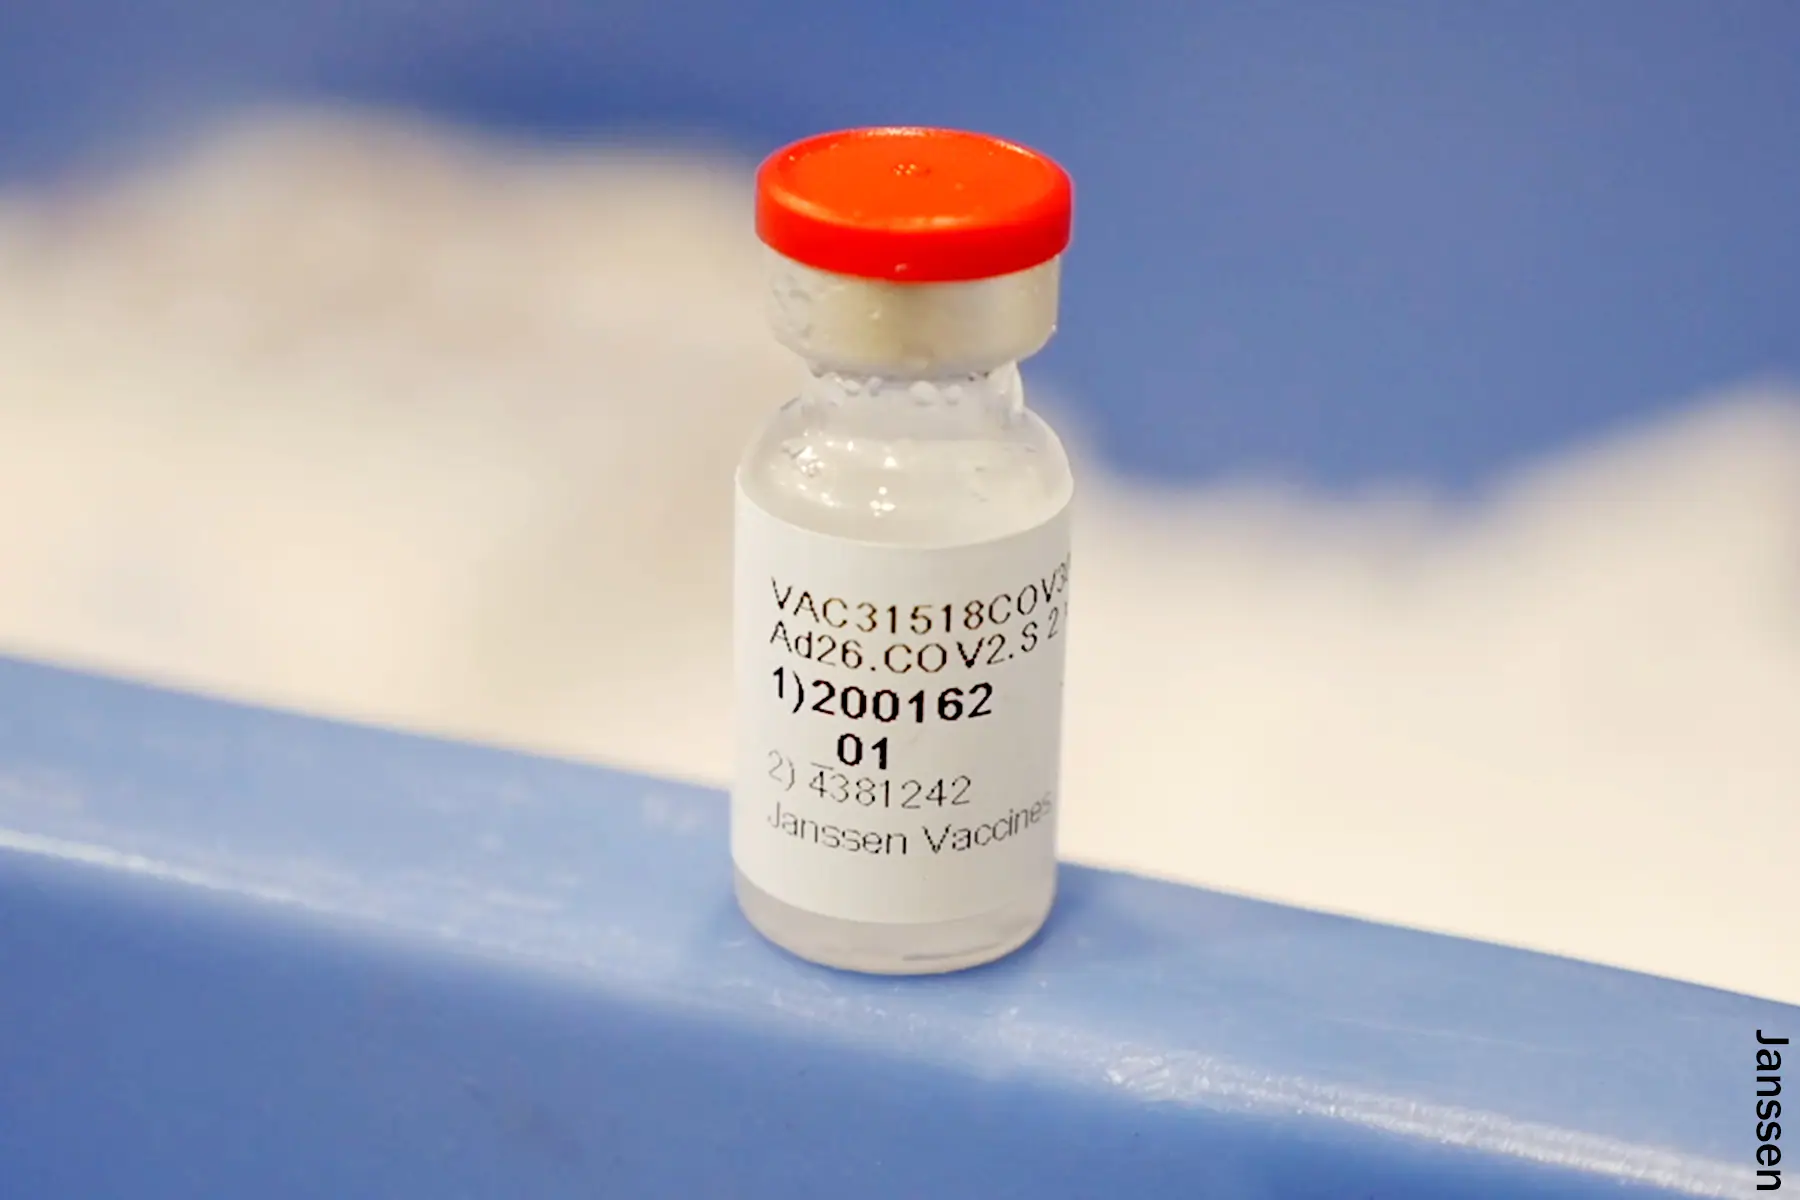 What to Know About the J&J COVID Vaccine Terminate